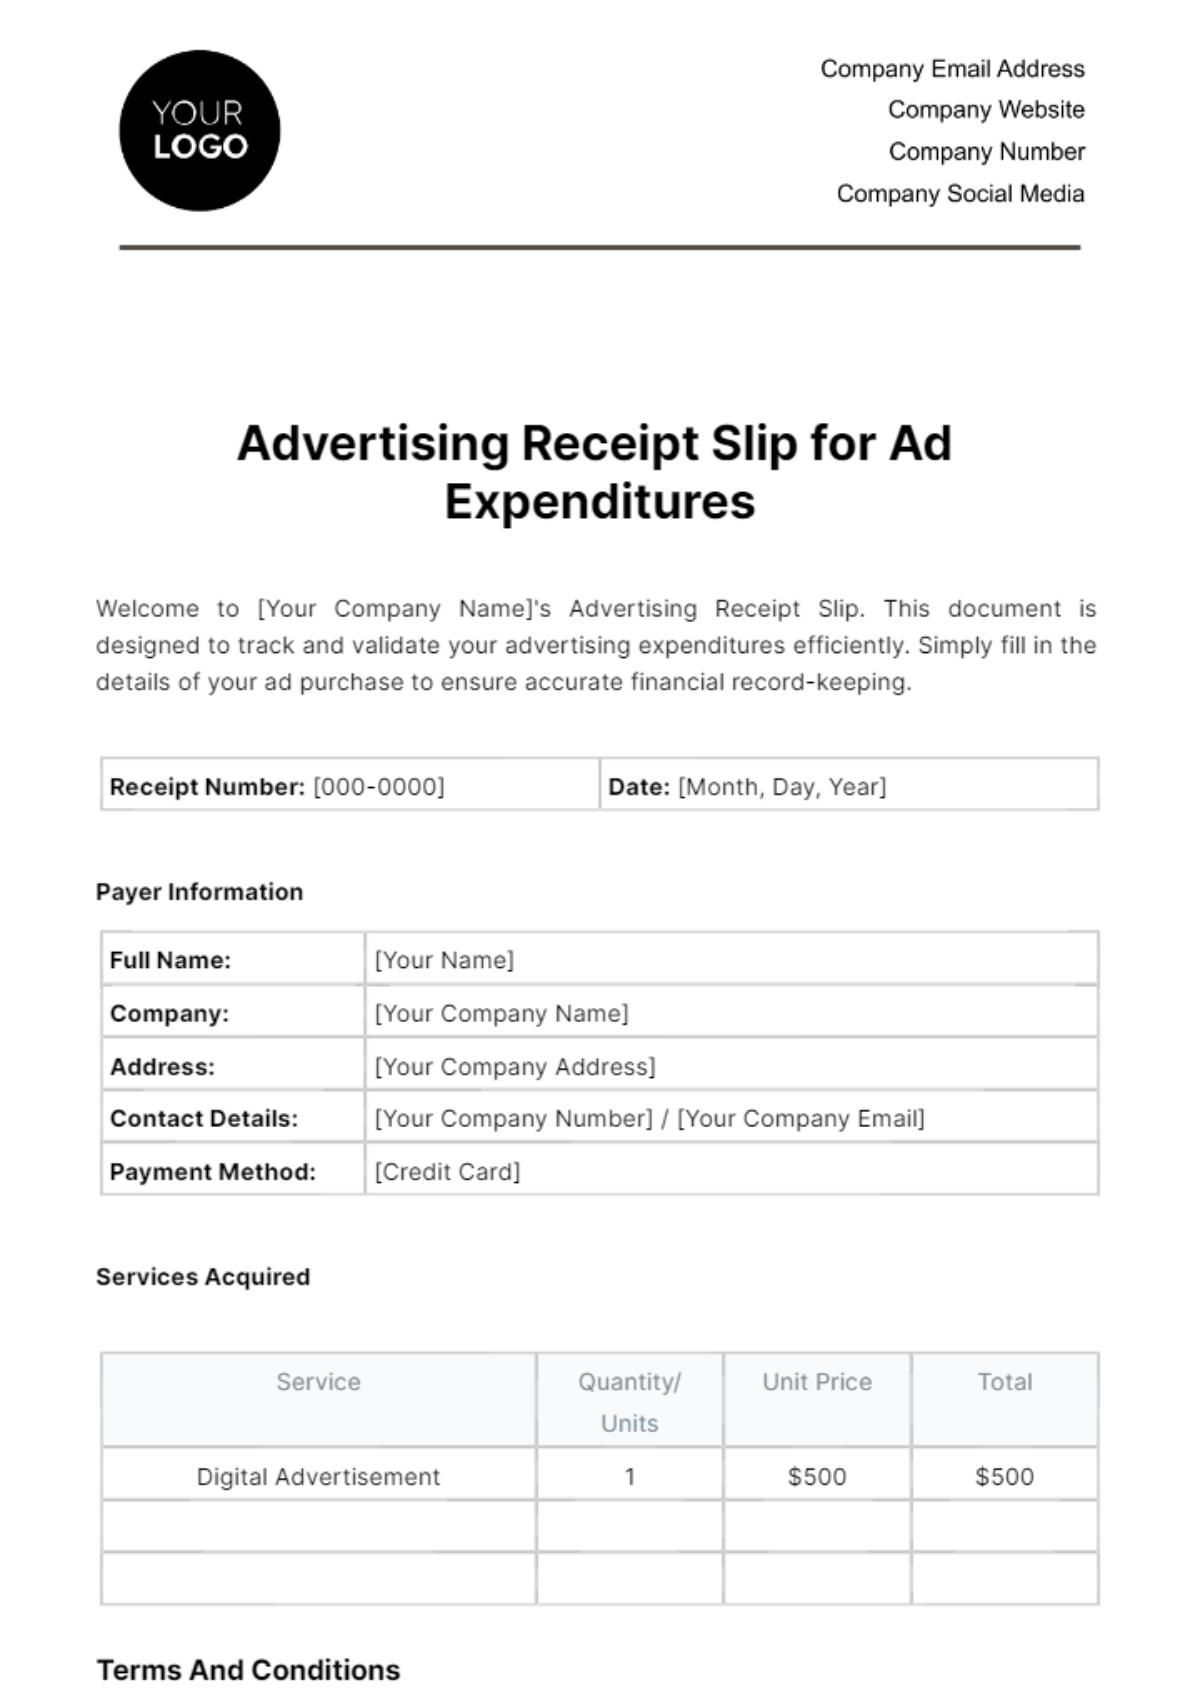 Free Advertising Receipt Slip for Ad Expenditures Template